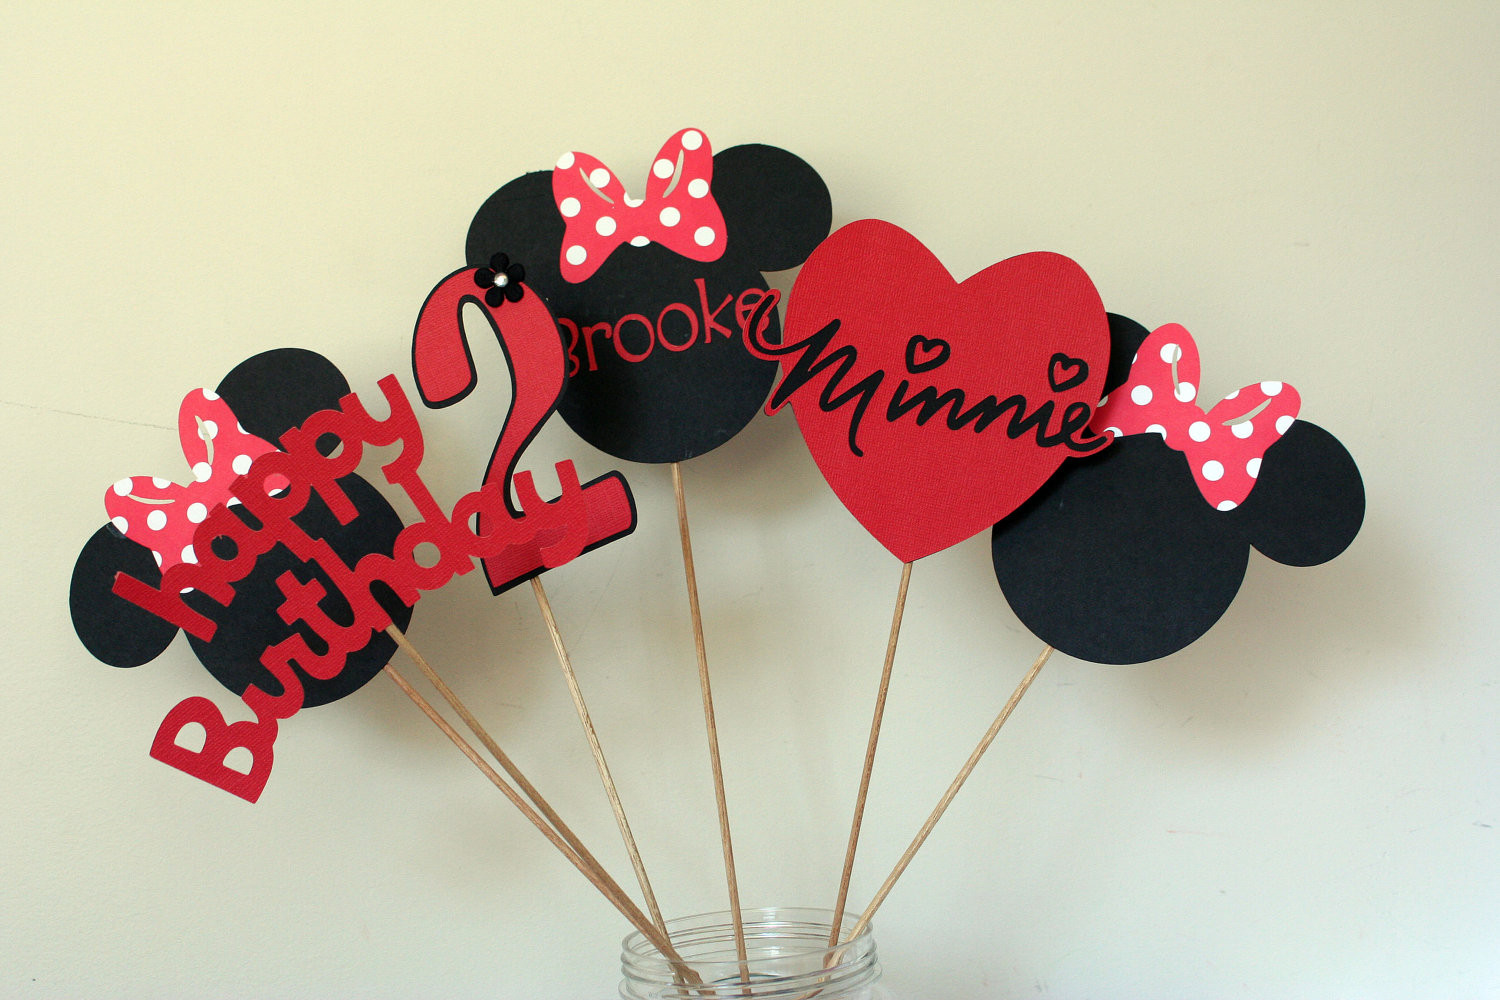 Red Minnie Mouse Birthday Decorations
 6 Piece Minnie Mouse Centerpiece red white and black Minnie